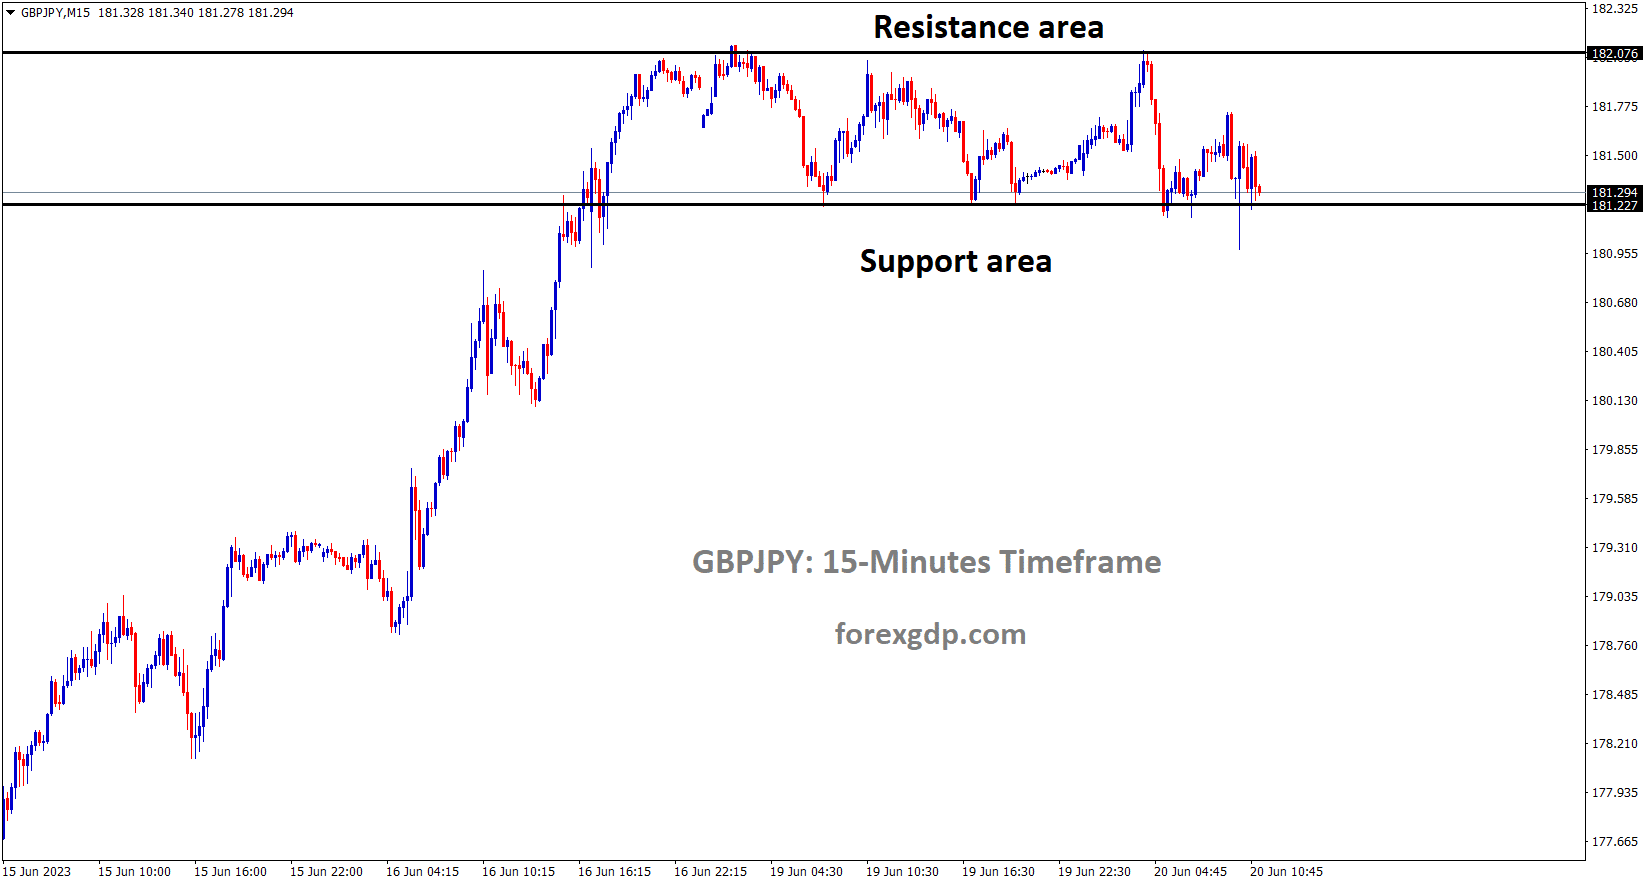 GBPJPY is moving in the Box pattern and the market has reached the support area of the pattern